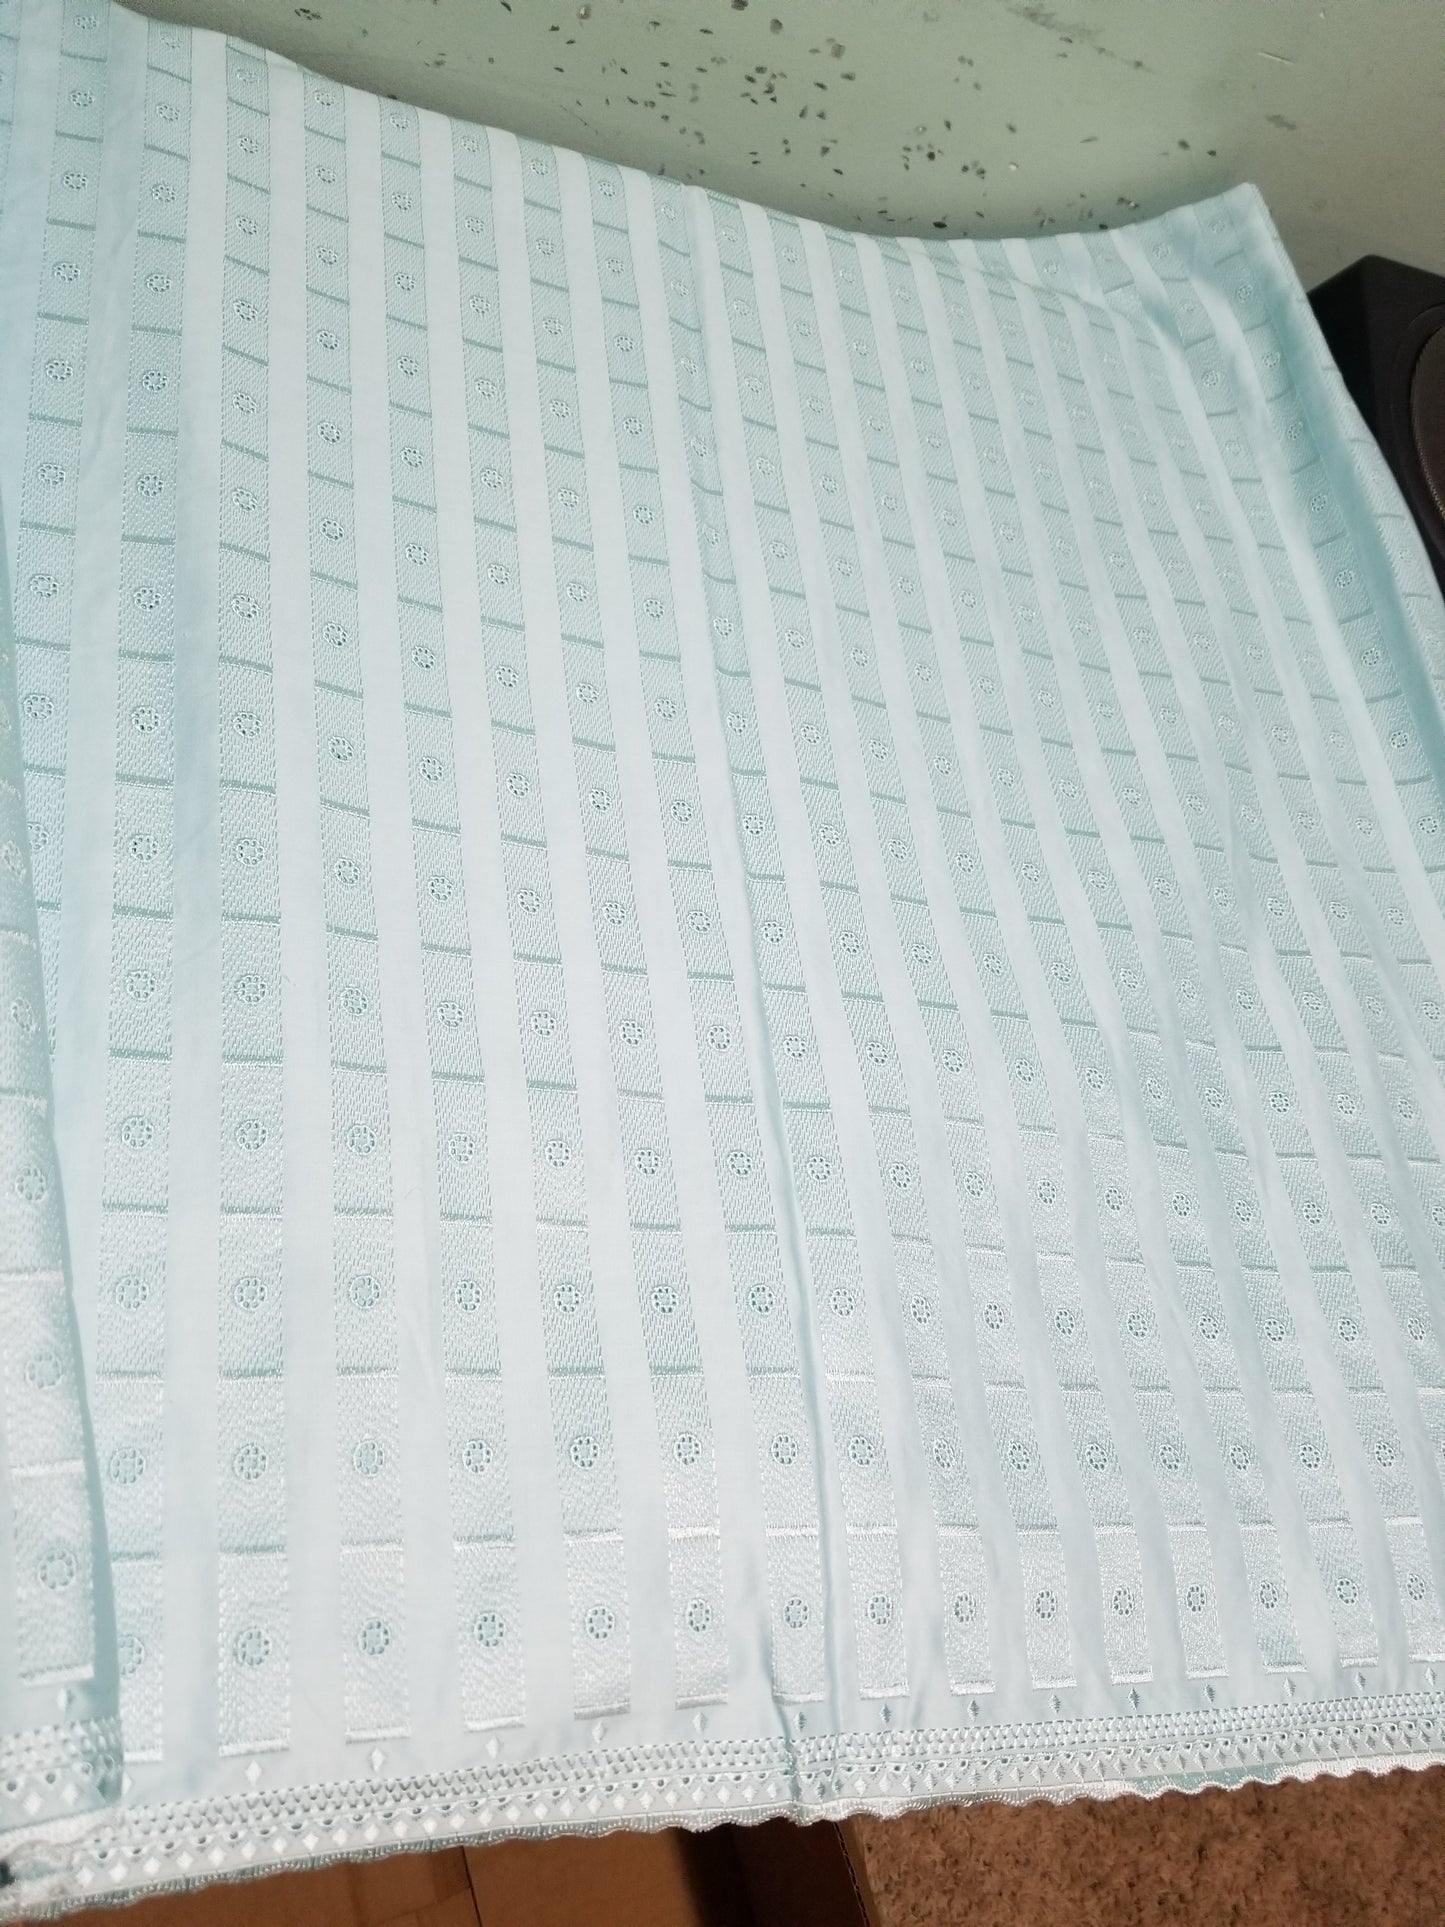 Mint Green Top quality  swiss voile lace fabric for Nigerian Men native outfit. Soft quality fabric. Can be use for agbada/3pc outfit for men. Sold per 5yds. Price is for 5yds